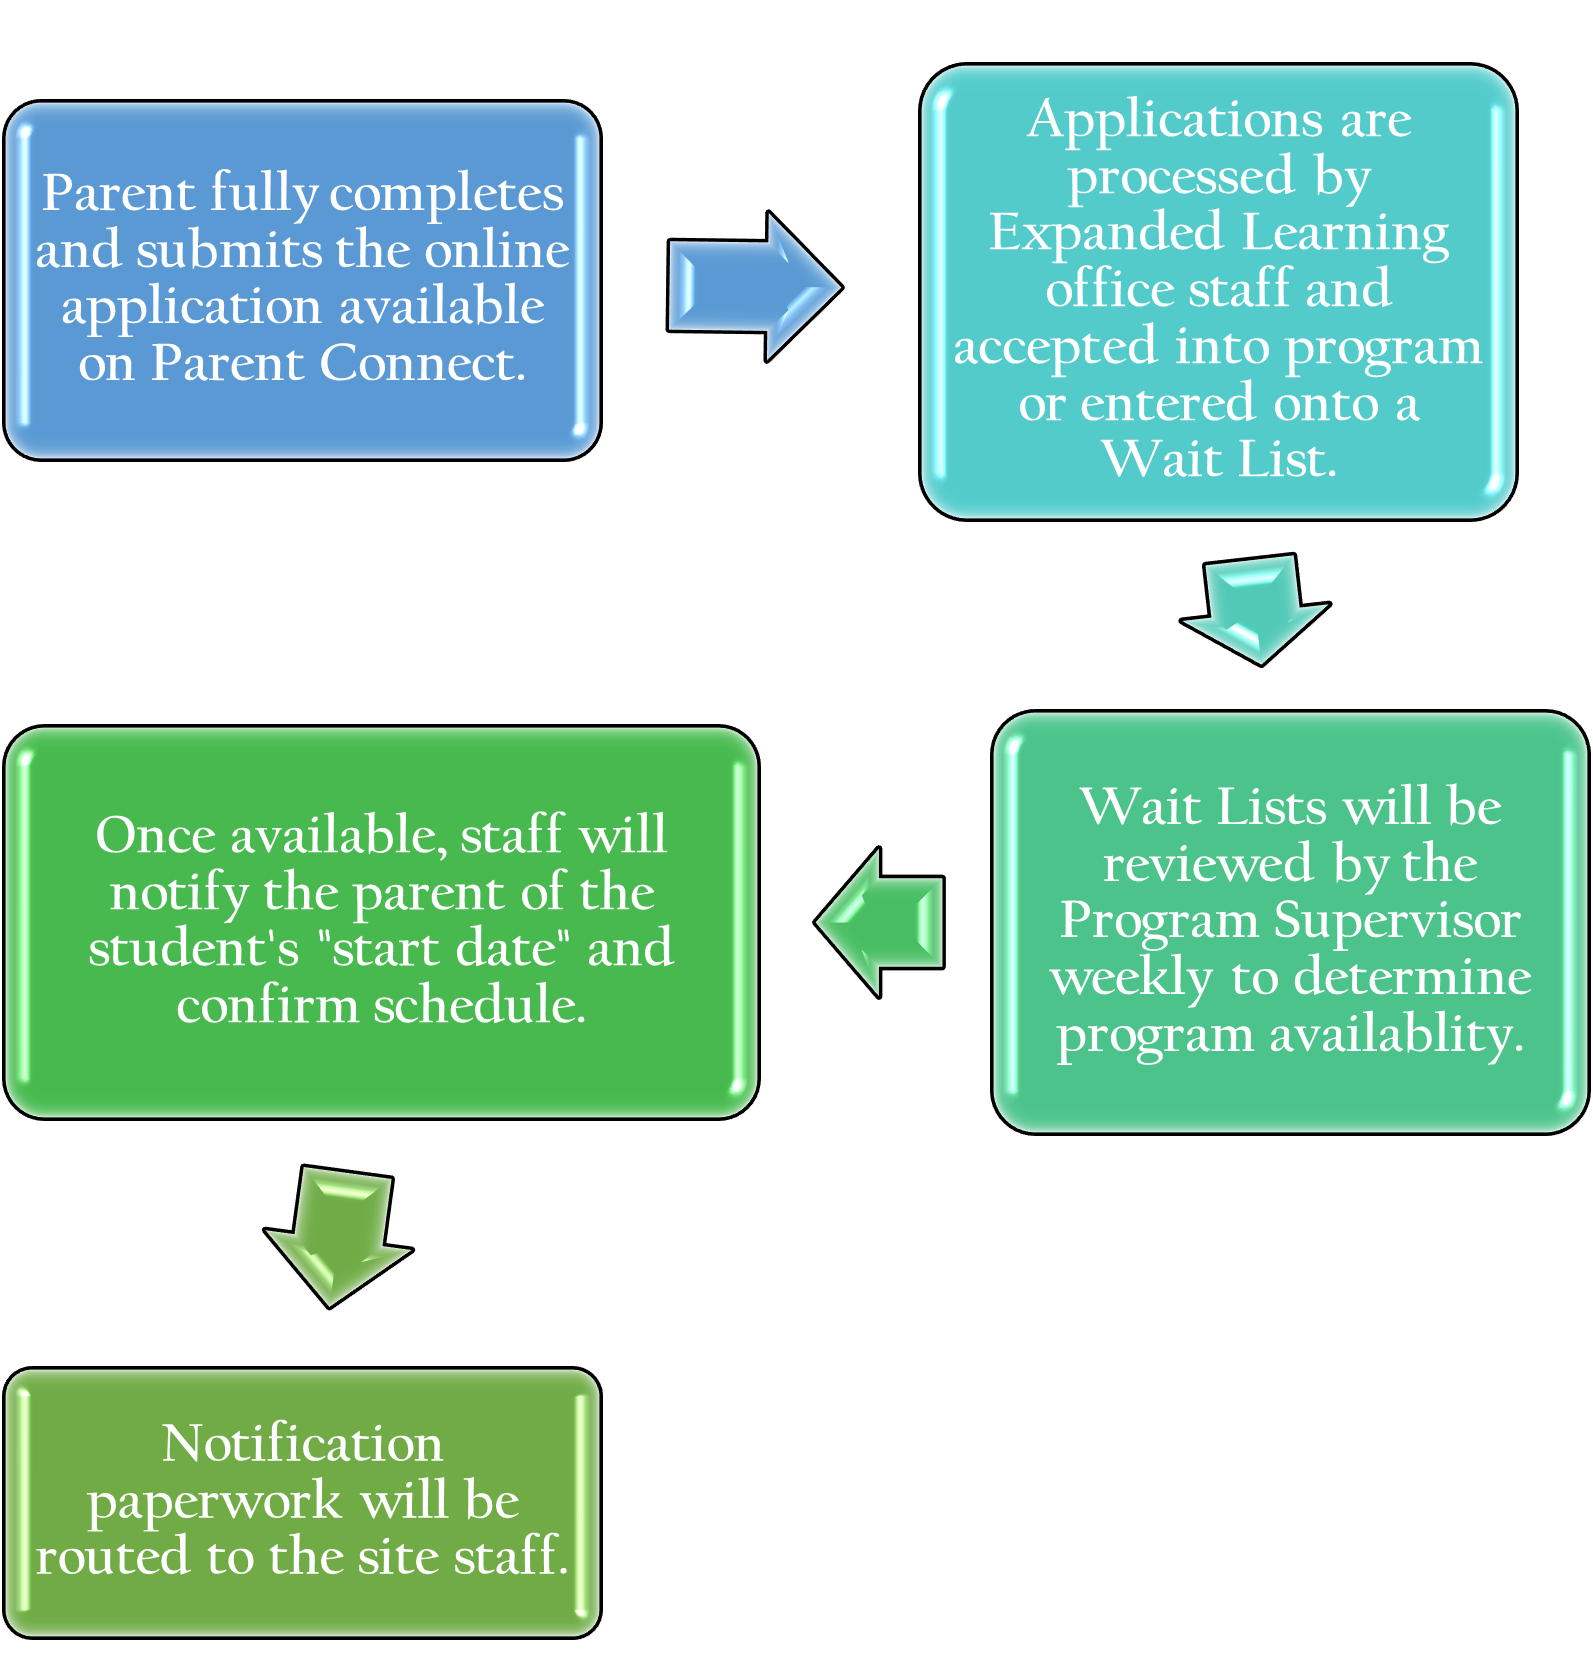 Registration Flow Chart - Parent completes online app via Parent Connect, reviewed by Expanded Learning staff and entered onto waitlist if at capacity, waitlist is reviewed weekly and parents notified if space is available